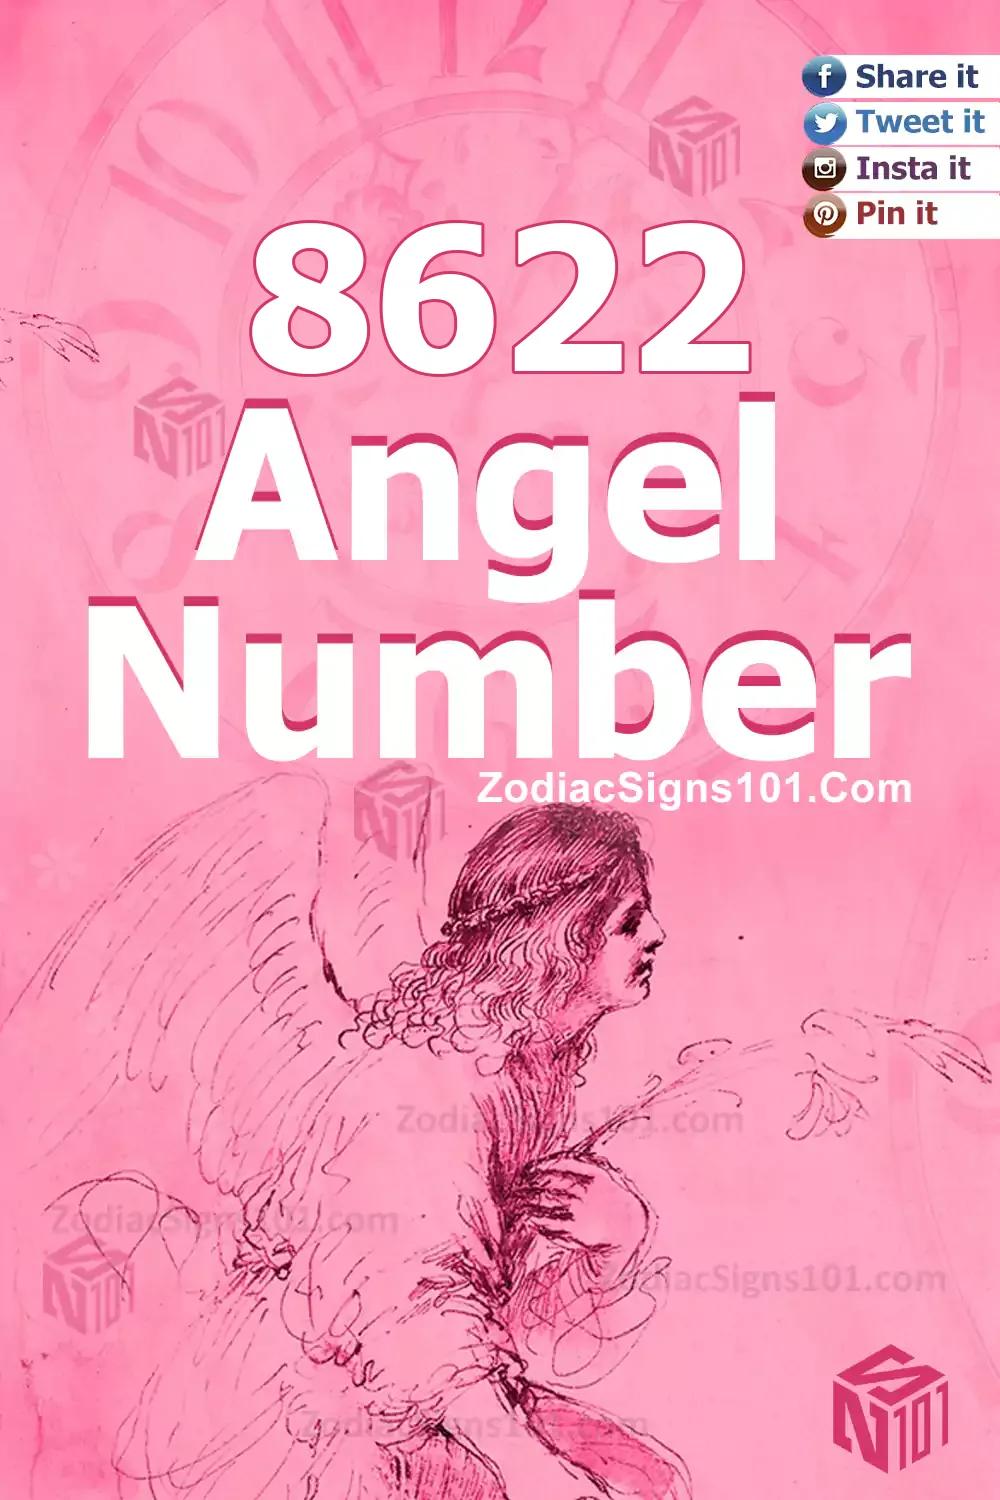 8622 Angel Number Meaning